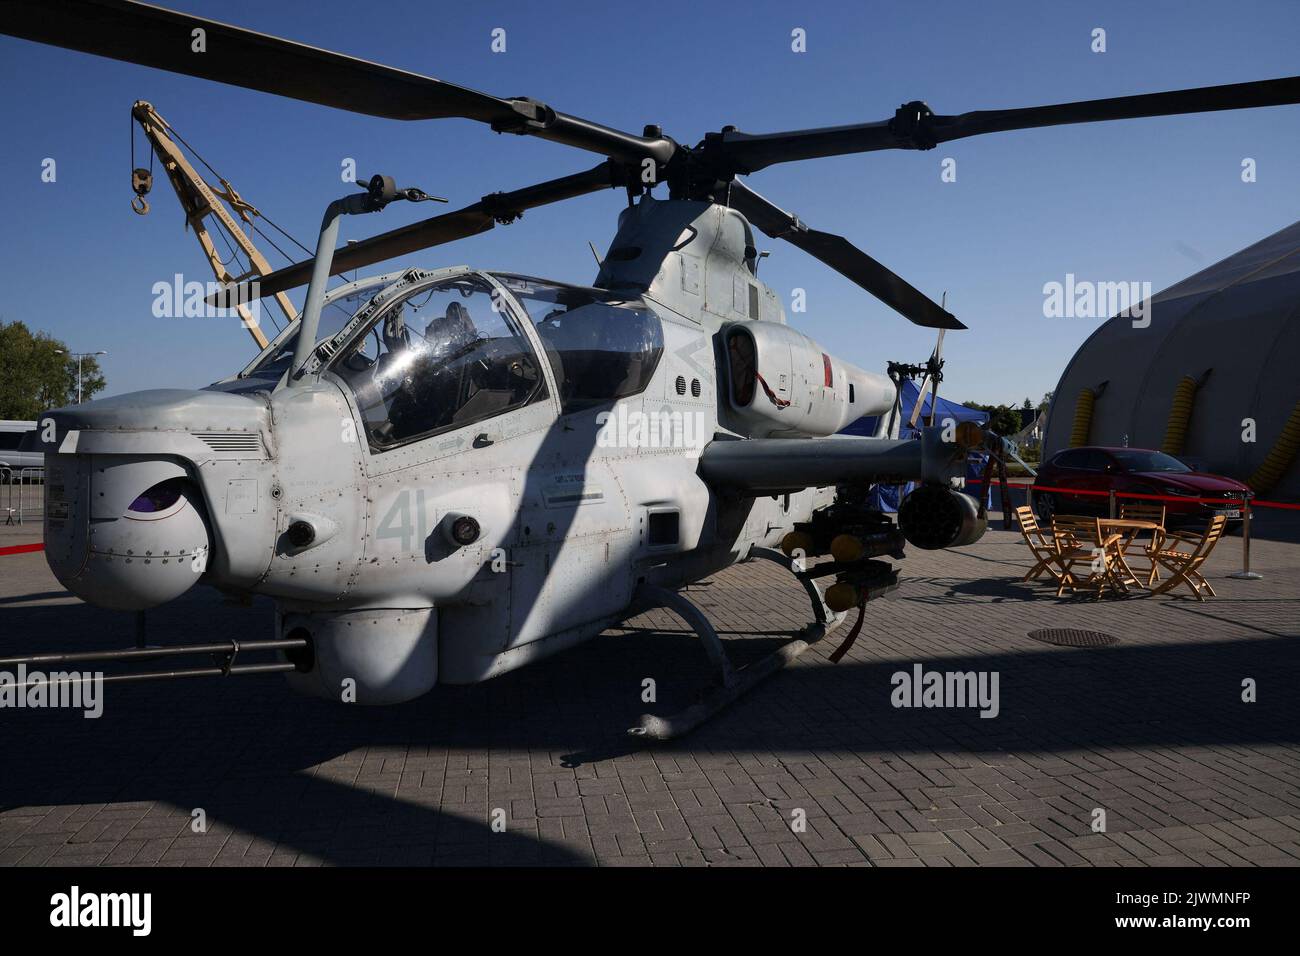 A Bell helicopter Ah-1Z Viper helicopter is seen outside a hall at the 30th International Defence Industry Exhibition in Kielce, Poland September 5, 2022. REUTERS/Kacper Pempel Stock Photo